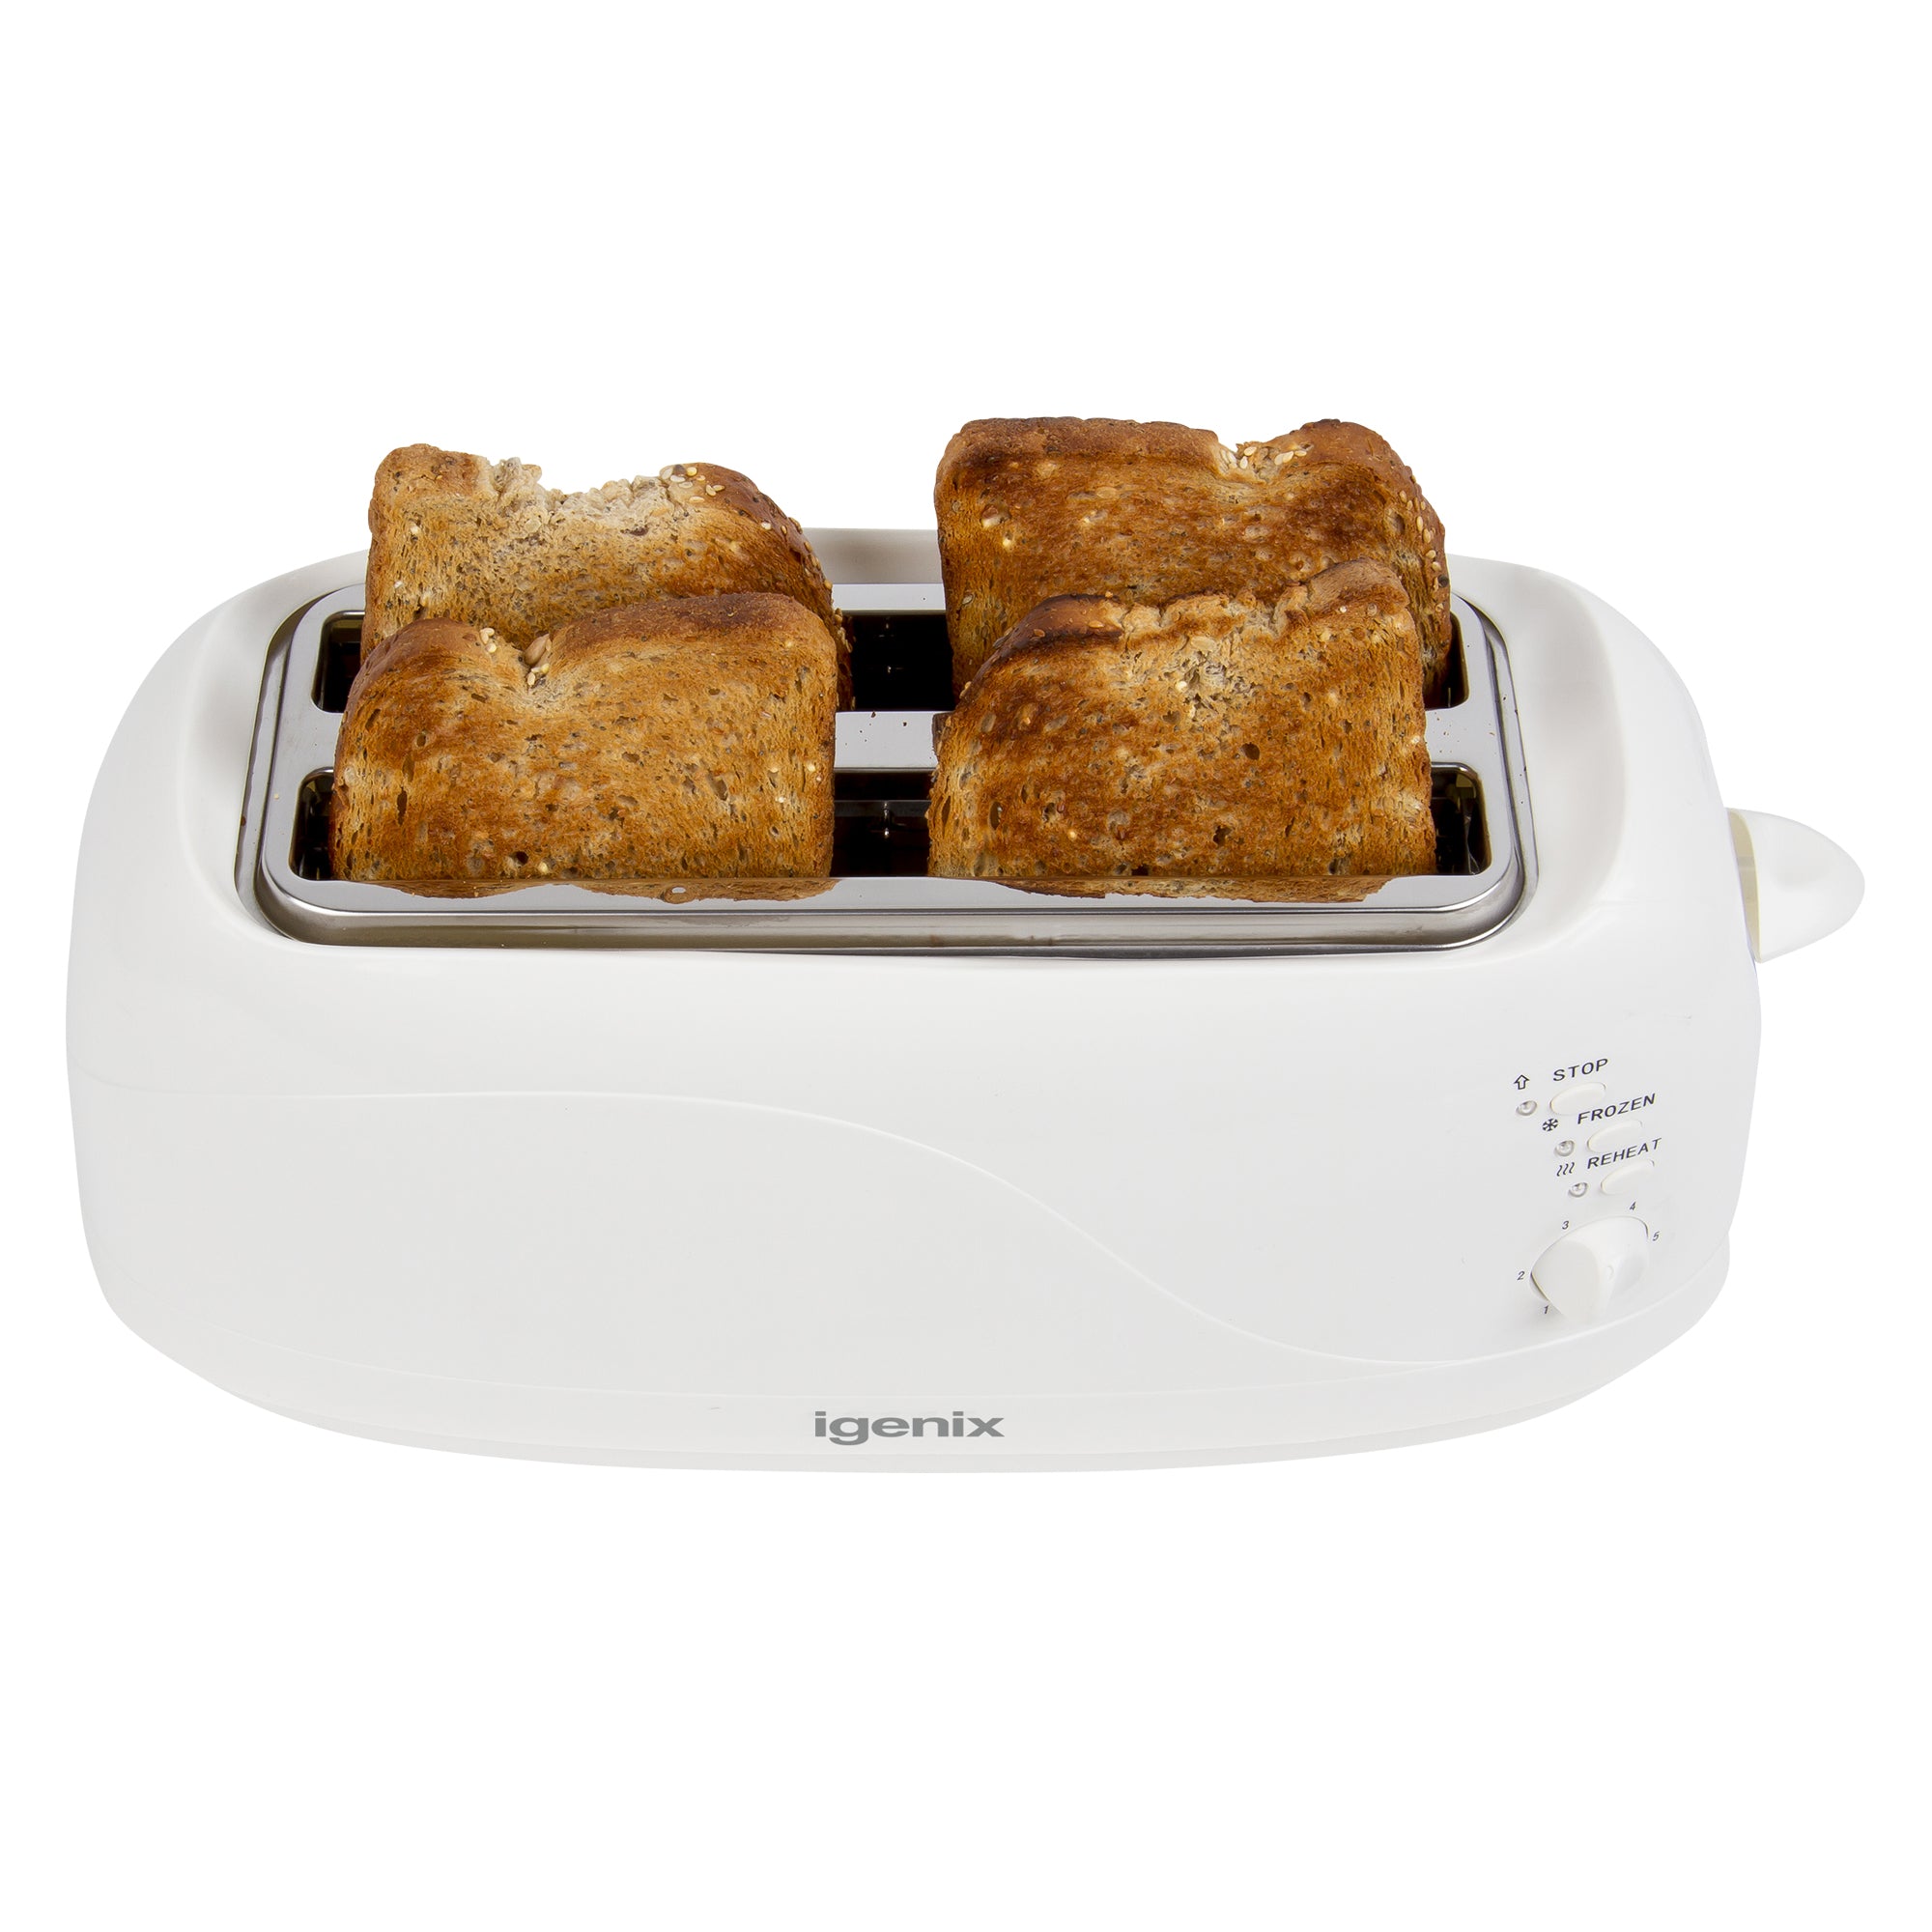 4 Slice Toaster, Removable Crumb Tray, White